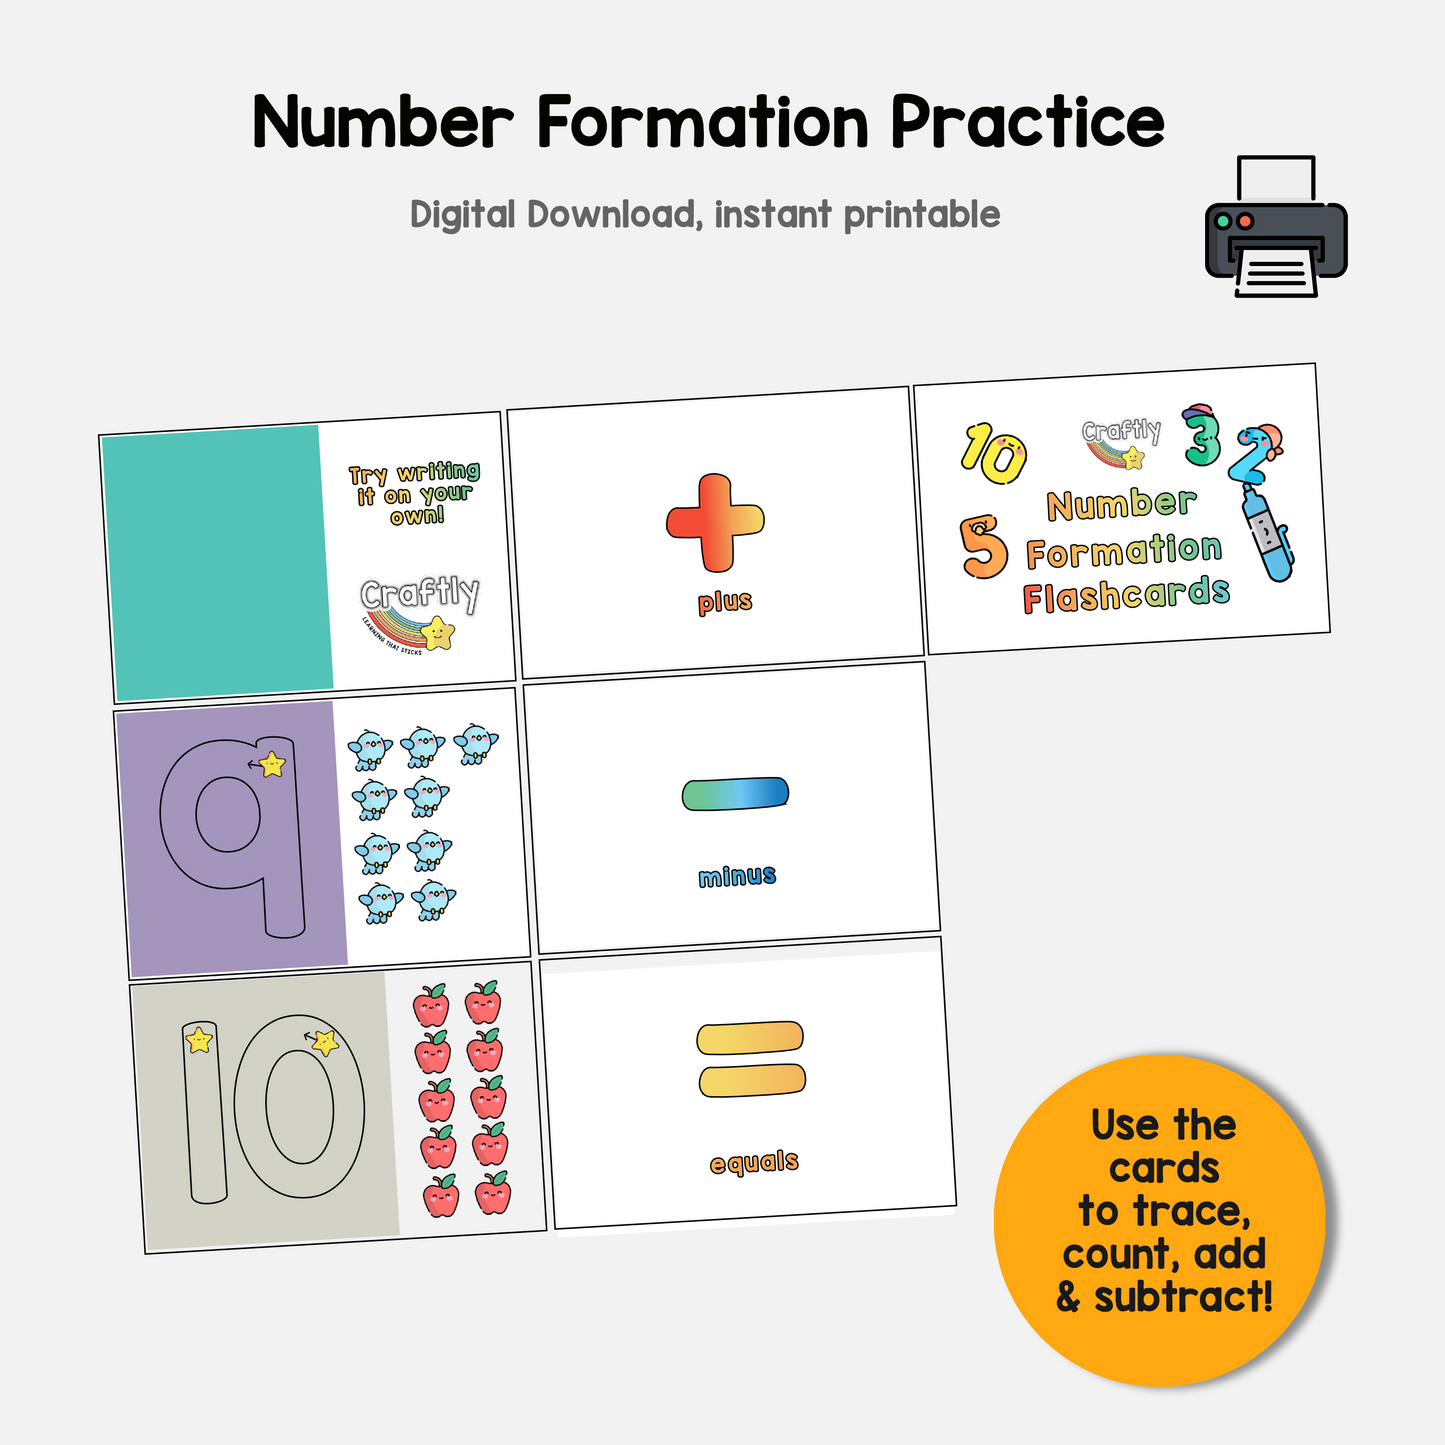 Number Formation Practice